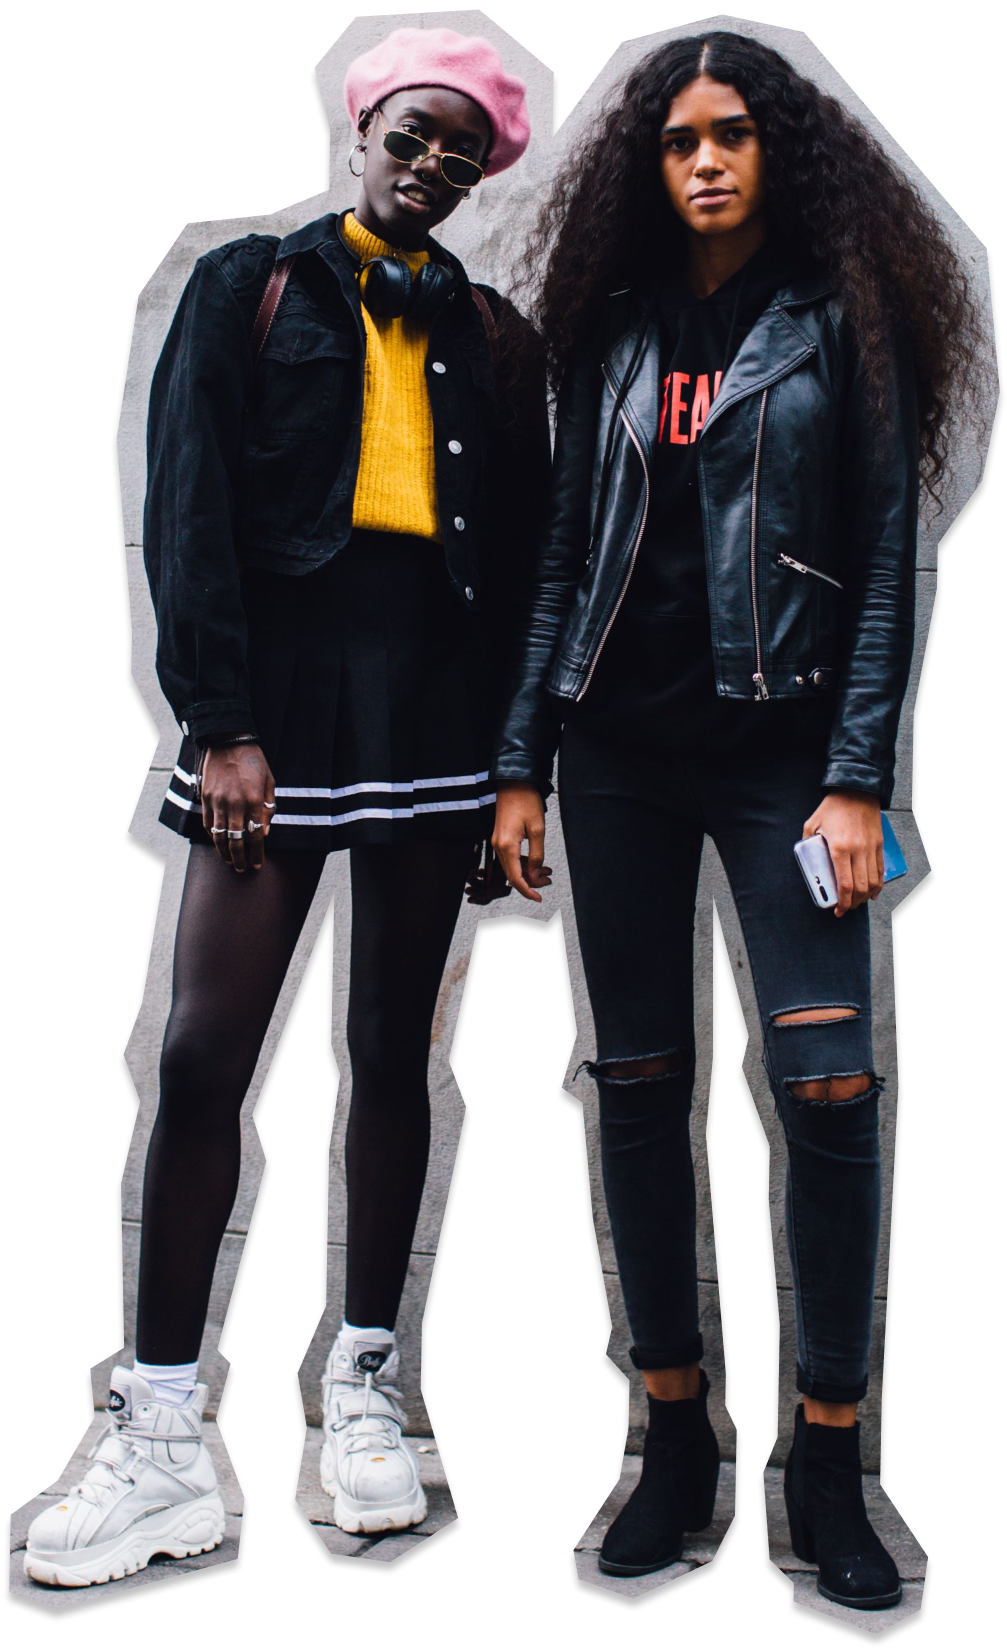 An image of two young black women dressed in punk outfits.